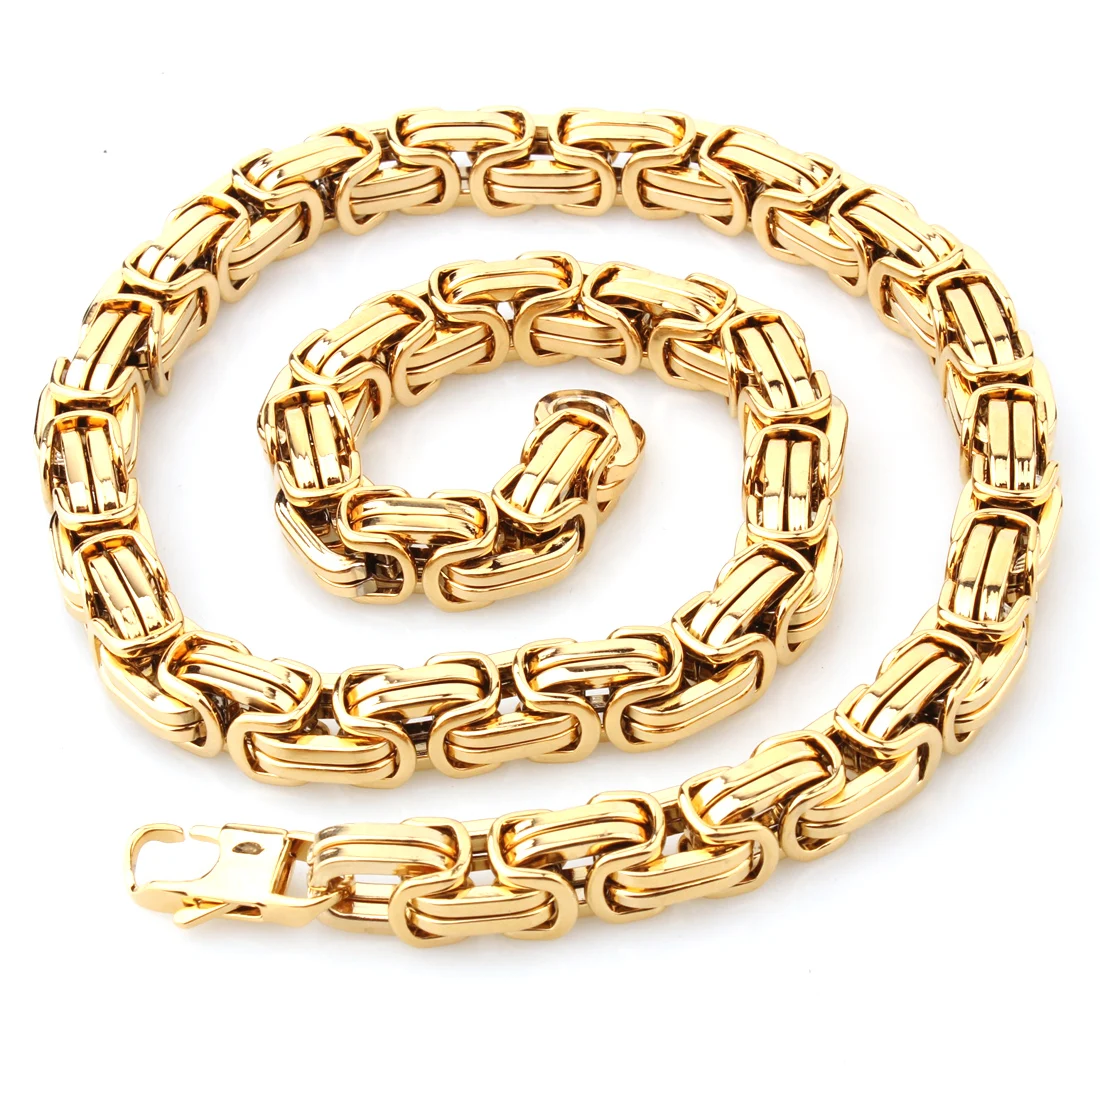 

Fashion New Men's Jewelry 15mm Gold Color Stainless Steel Huge Heavy Wide Byzantine King Chain Necklace Or Bracelet